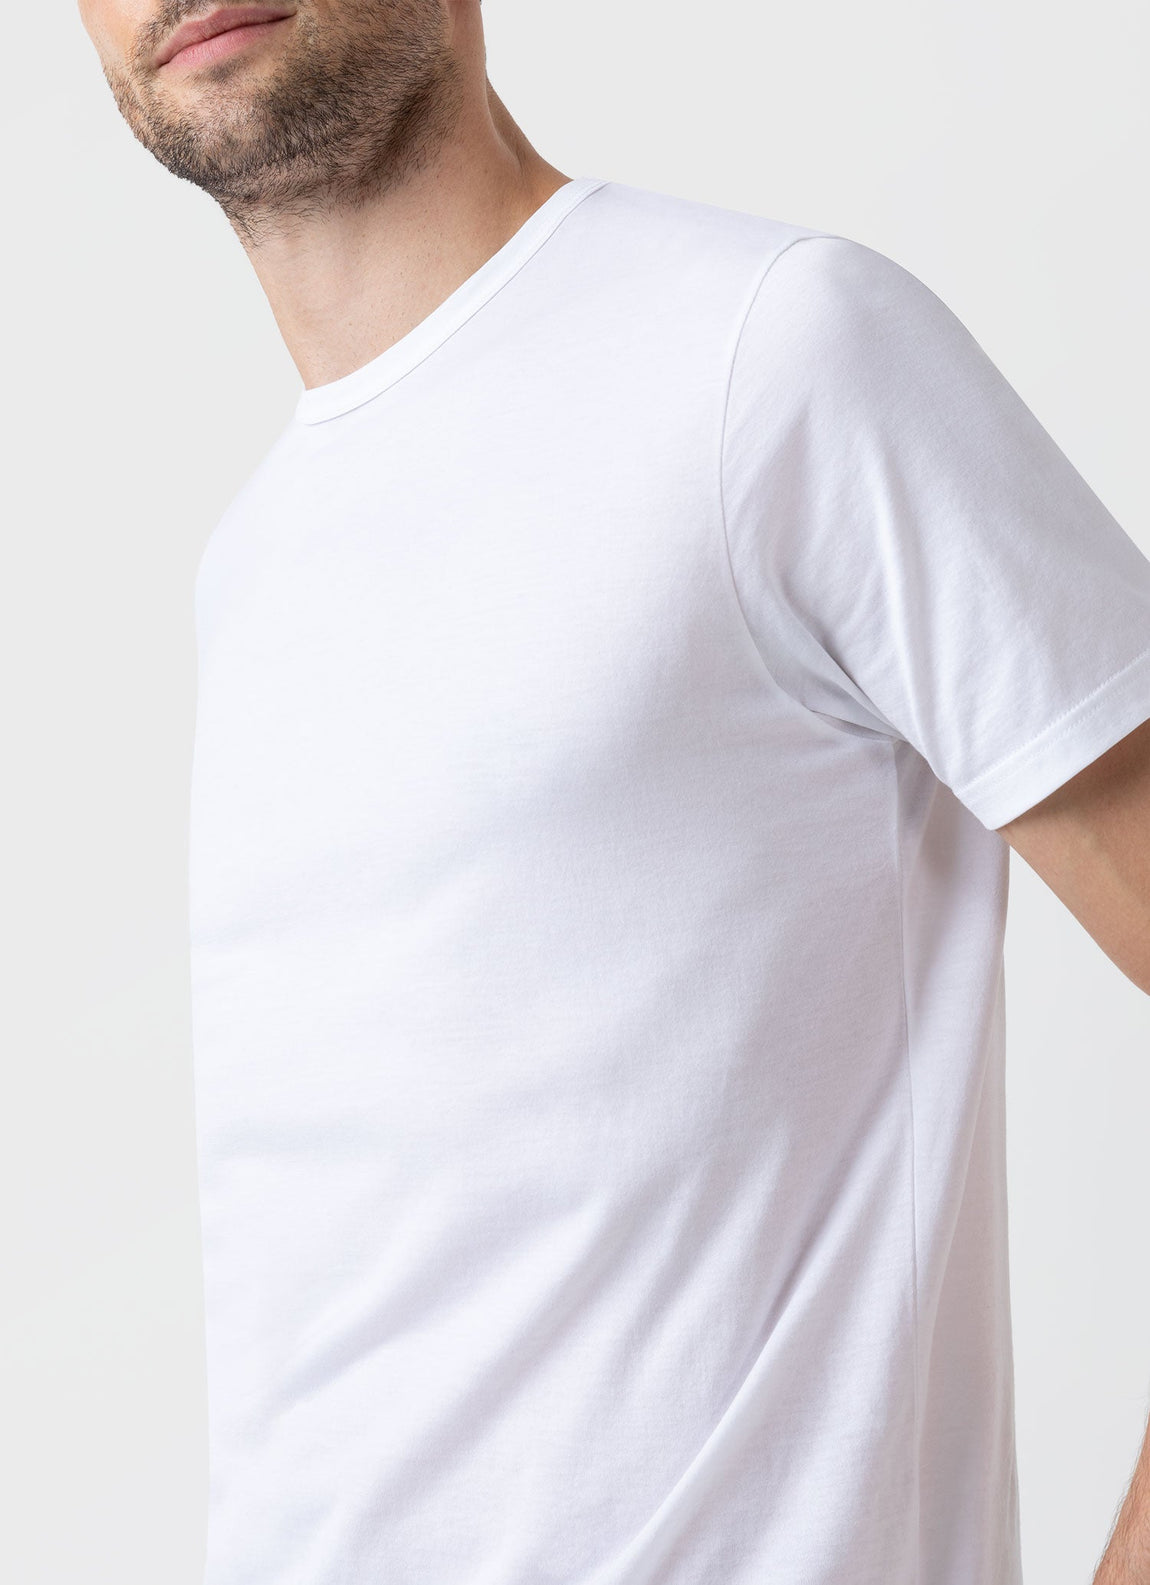 SS White Henley - T-Shirts made in USA from Portuguese fabric